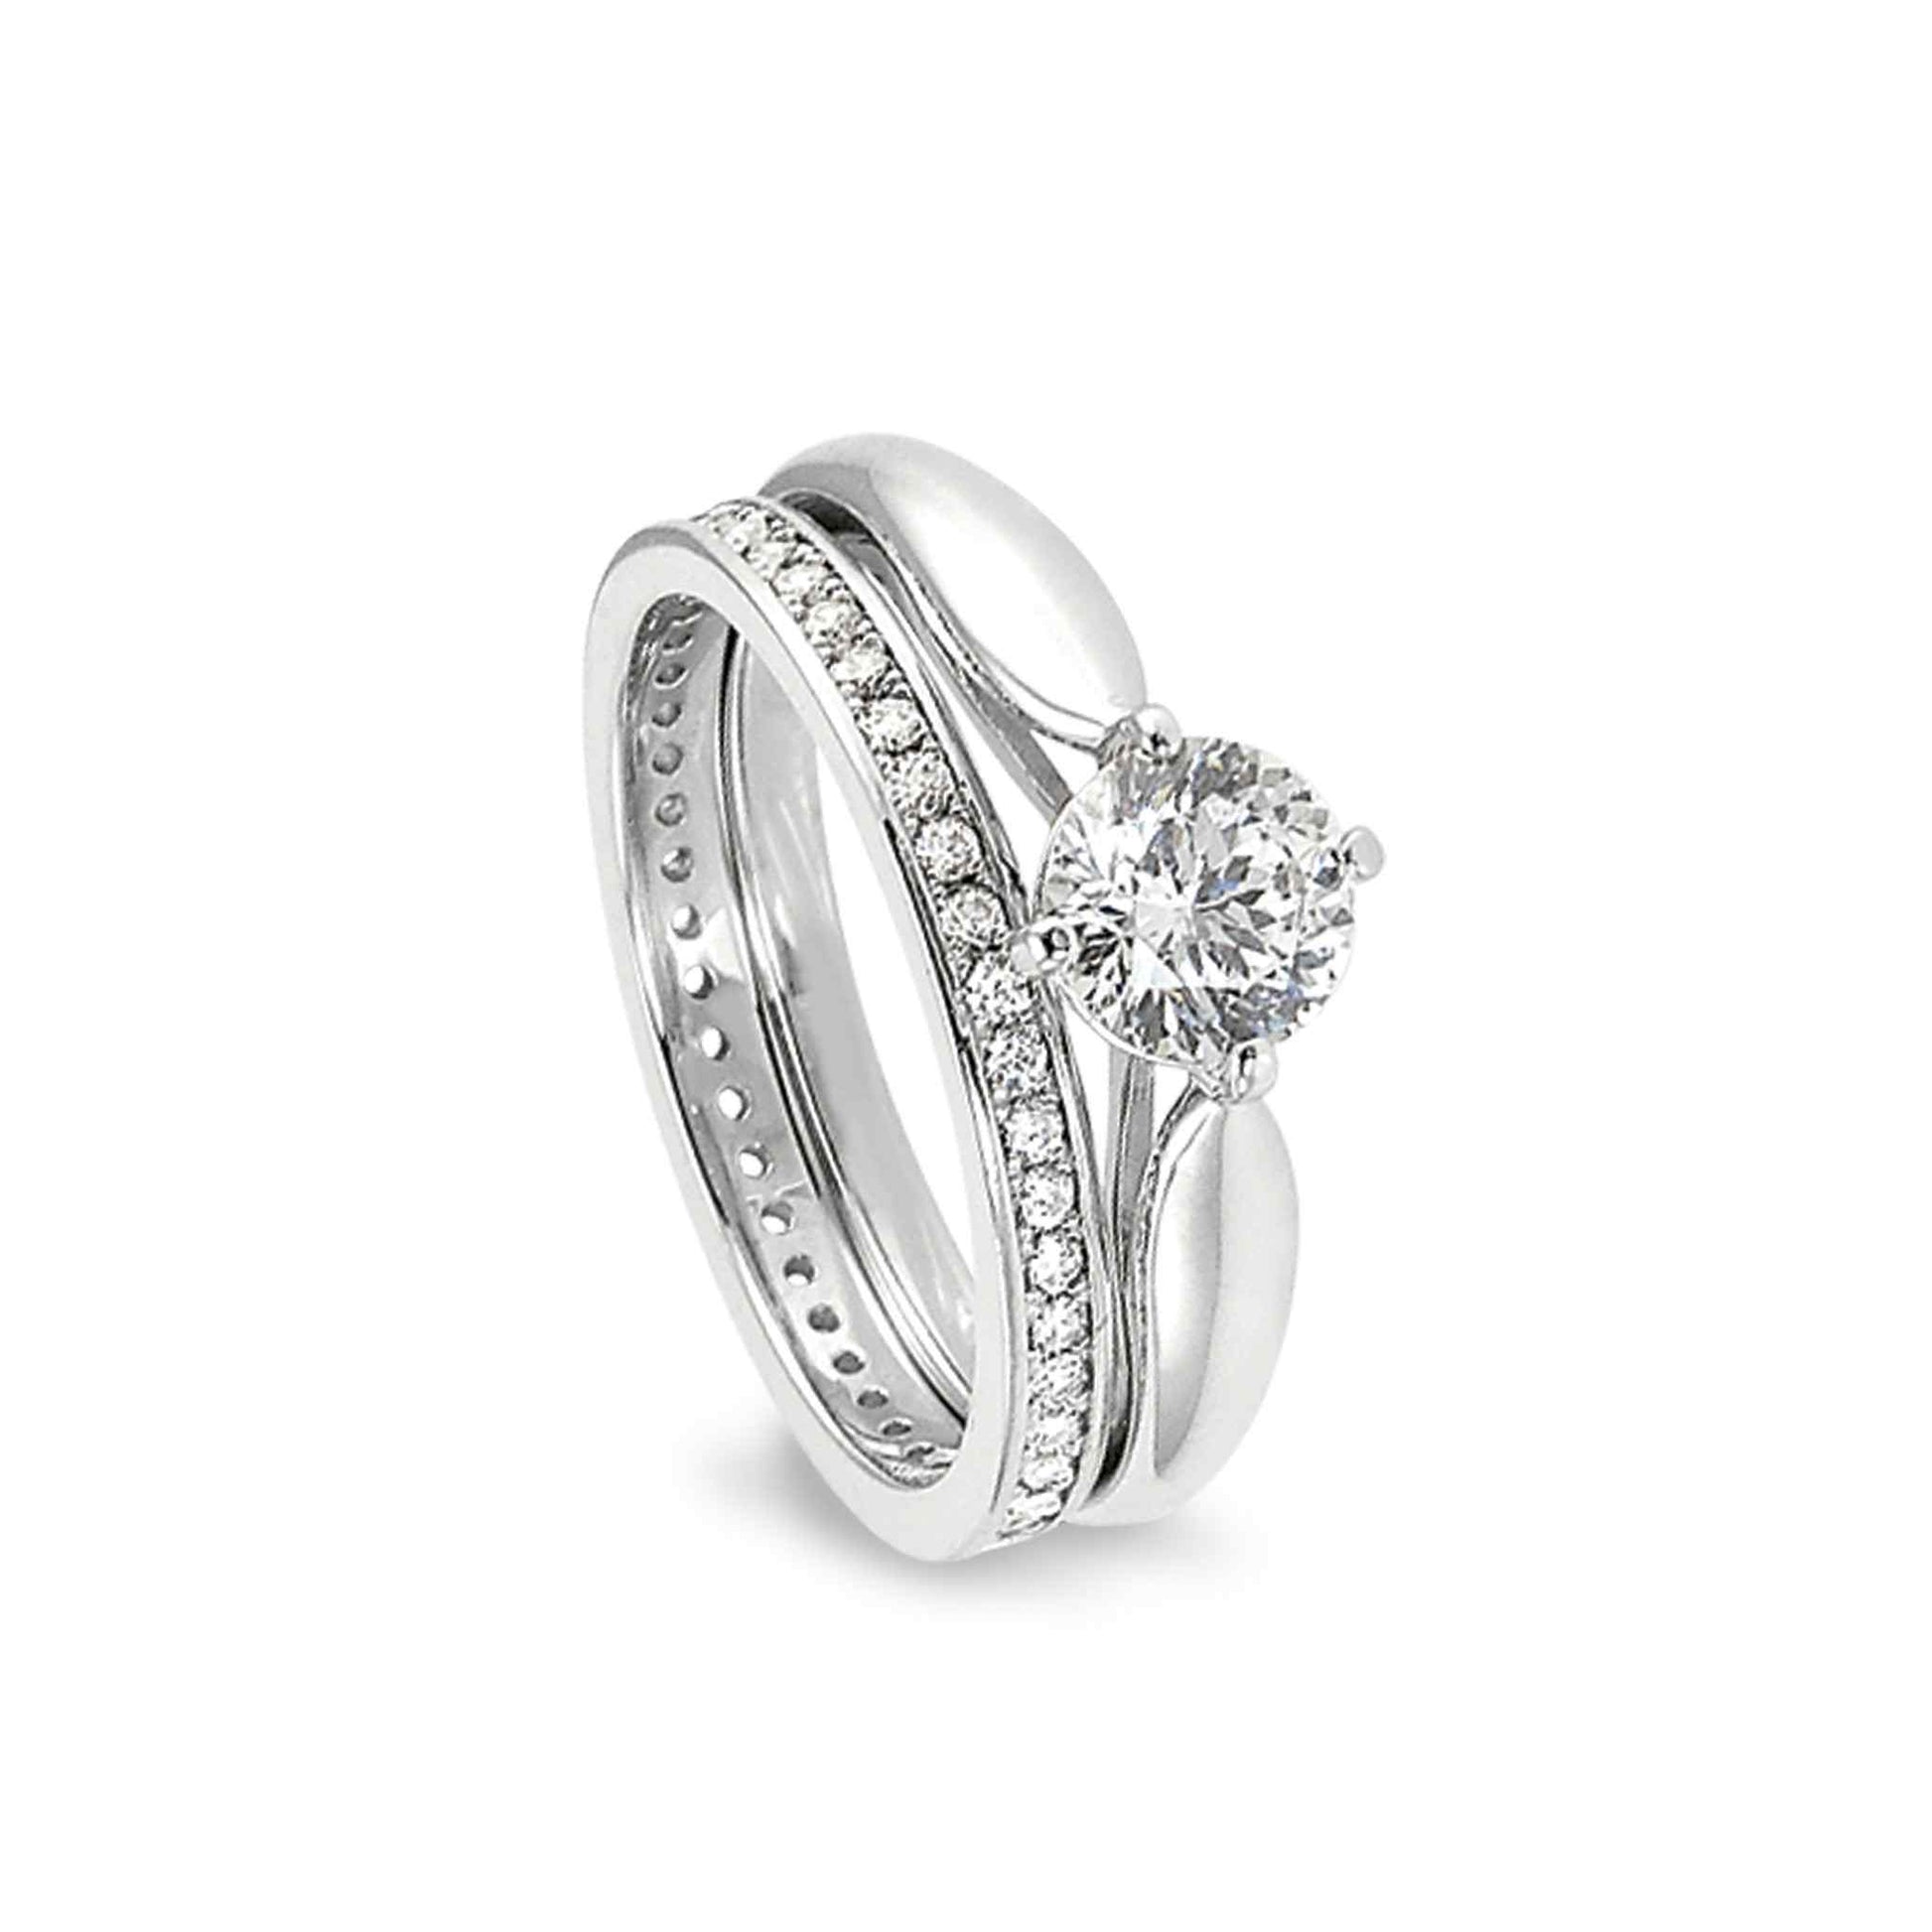 A solitaire wedding ring set with 100 facet simulated diamond displayed on a neutral white background.